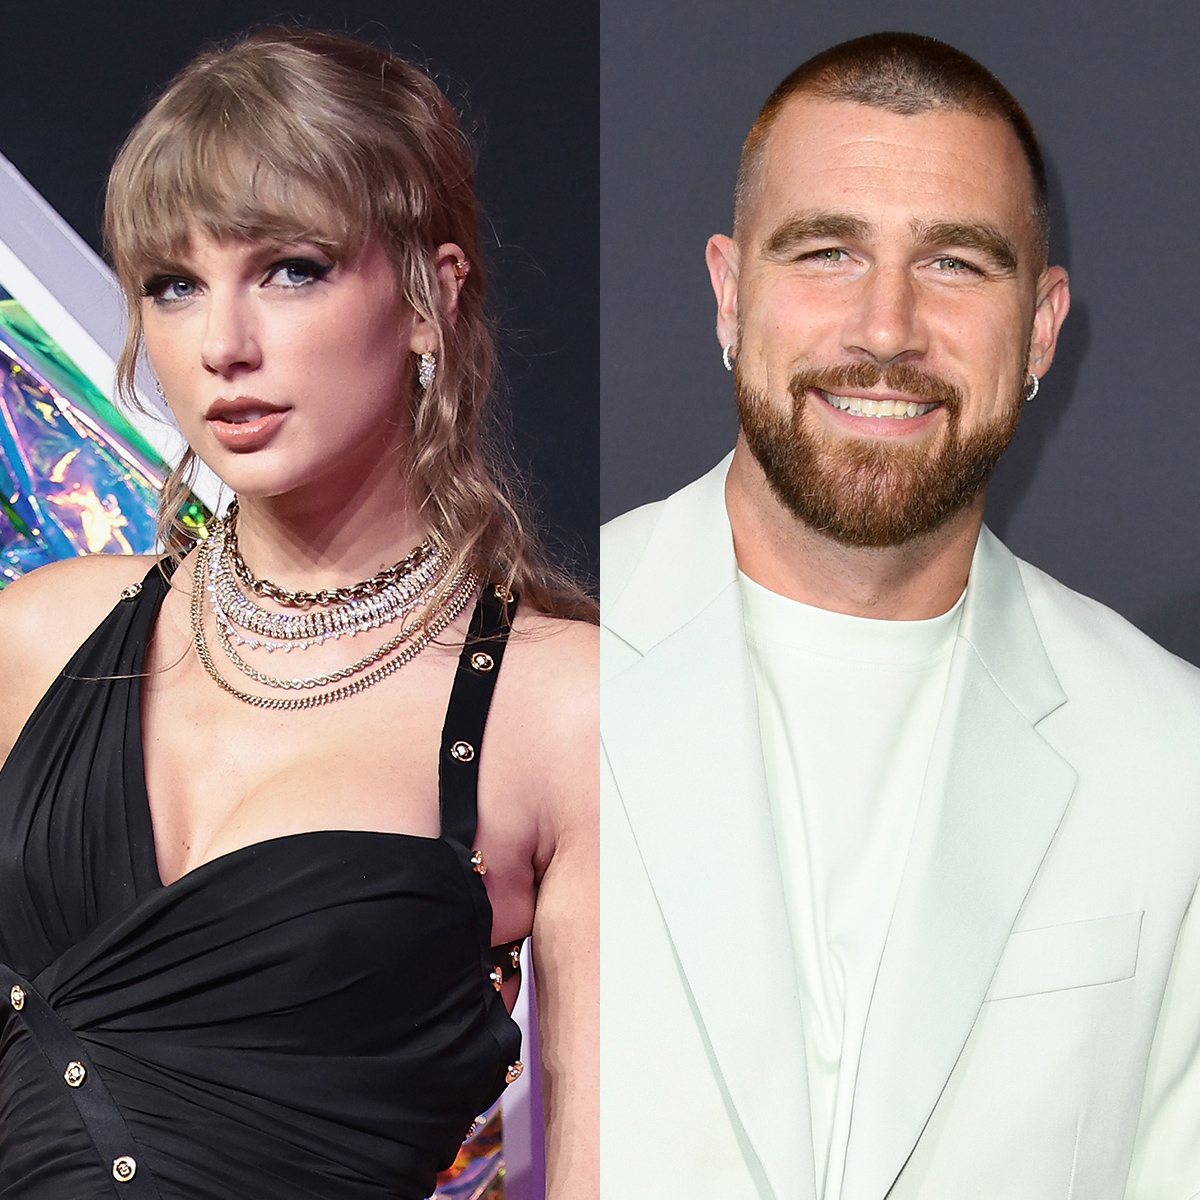 Travis Kelce on Taylor Swift dating rumors: 'Threw the ball in her